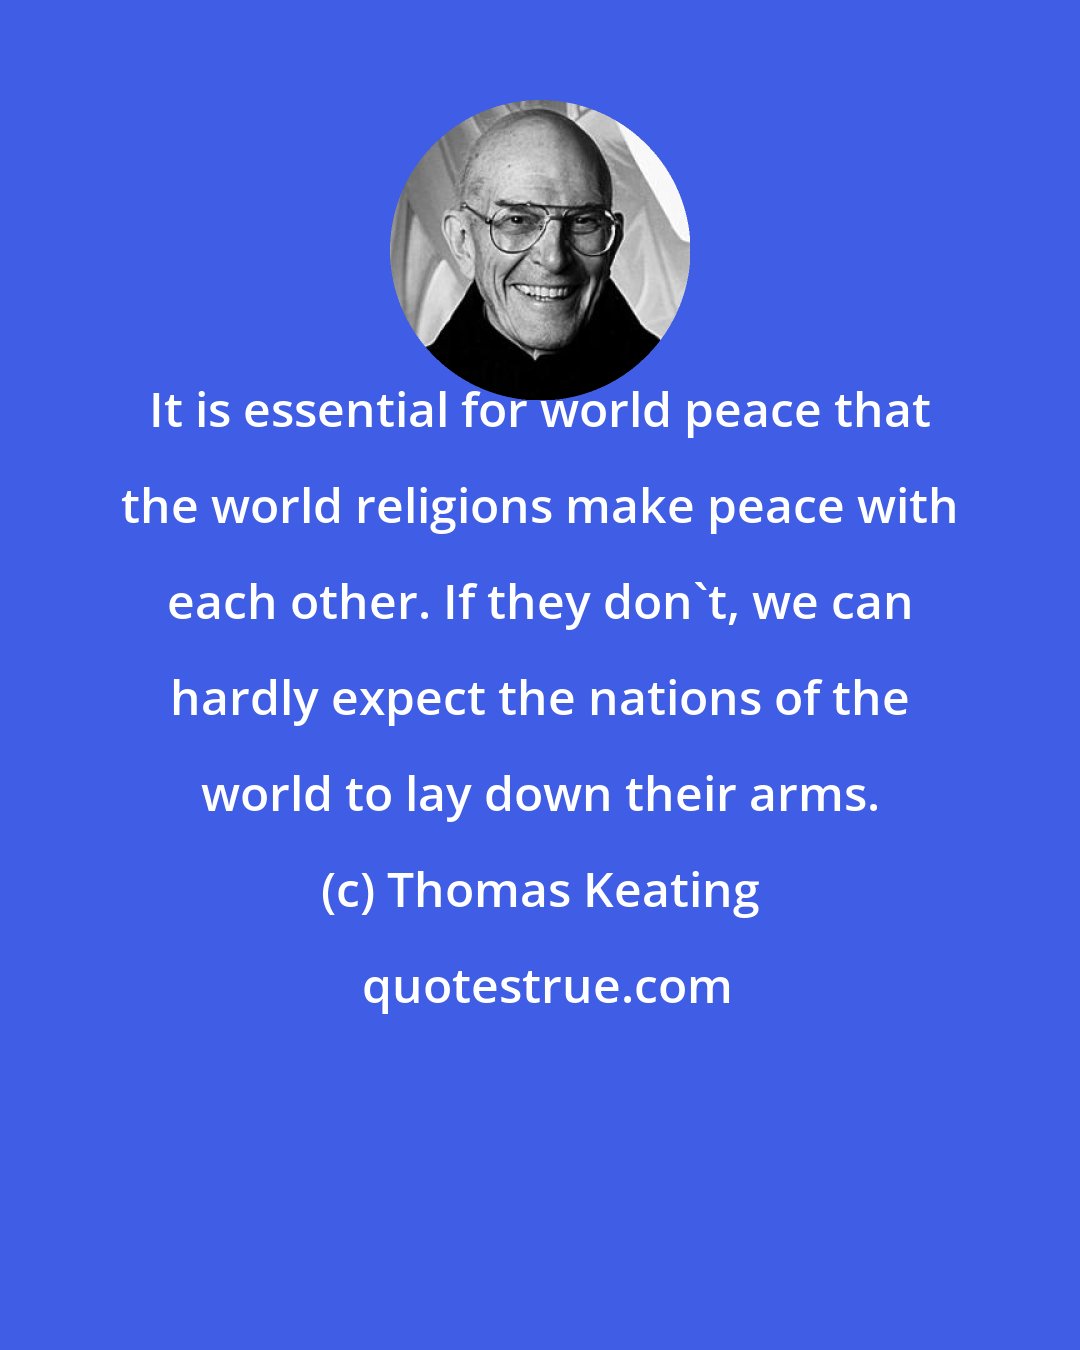 Thomas Keating: It is essential for world peace that the world religions make peace with each other. If they don't, we can hardly expect the nations of the world to lay down their arms.